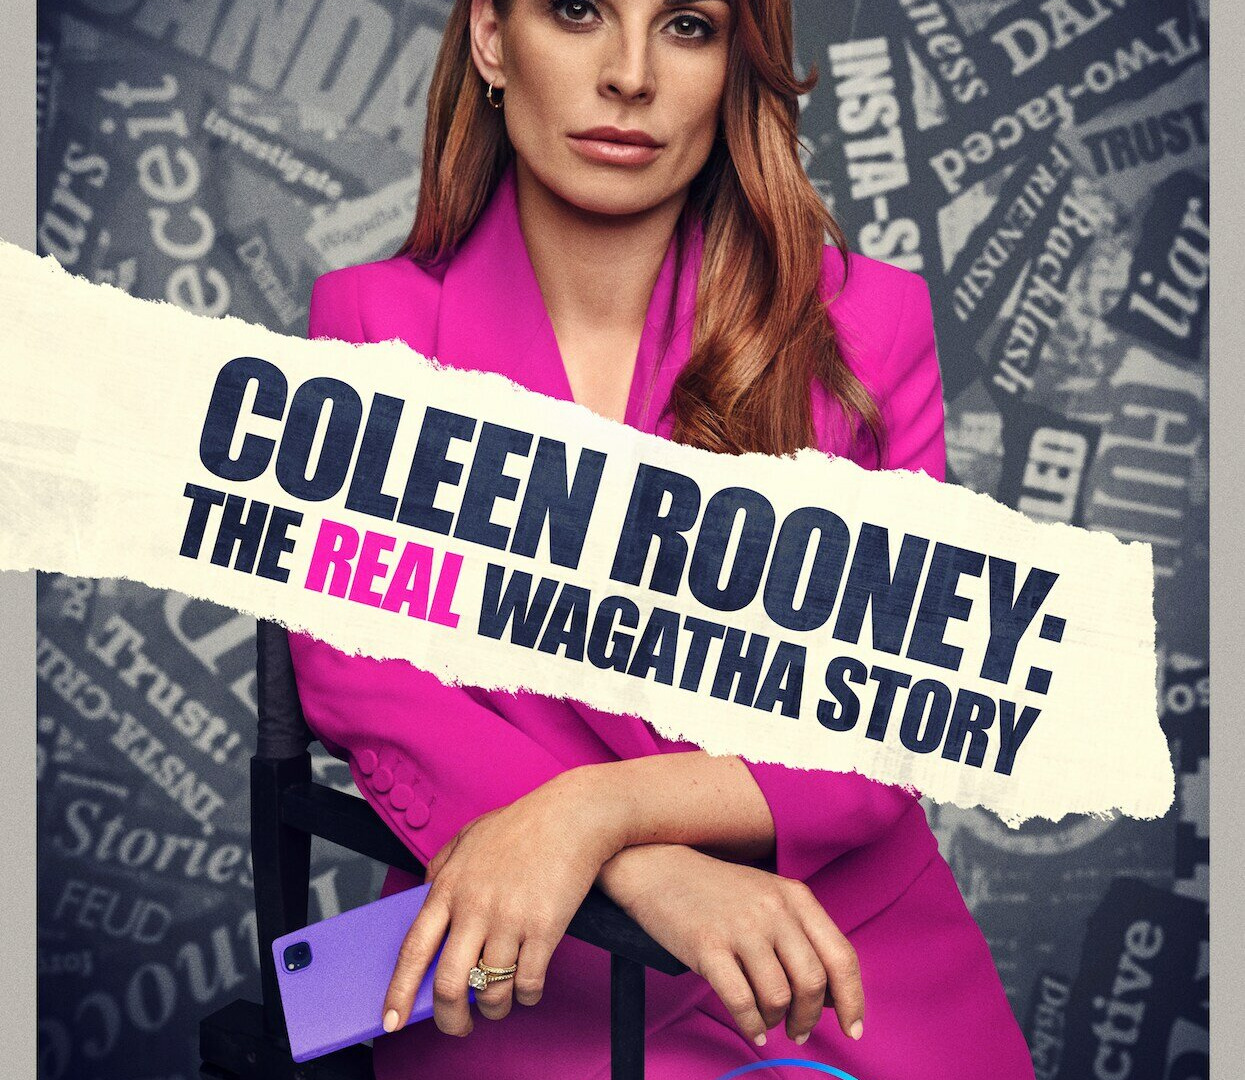 Show Coleen Rooney: The Real Wagatha Story